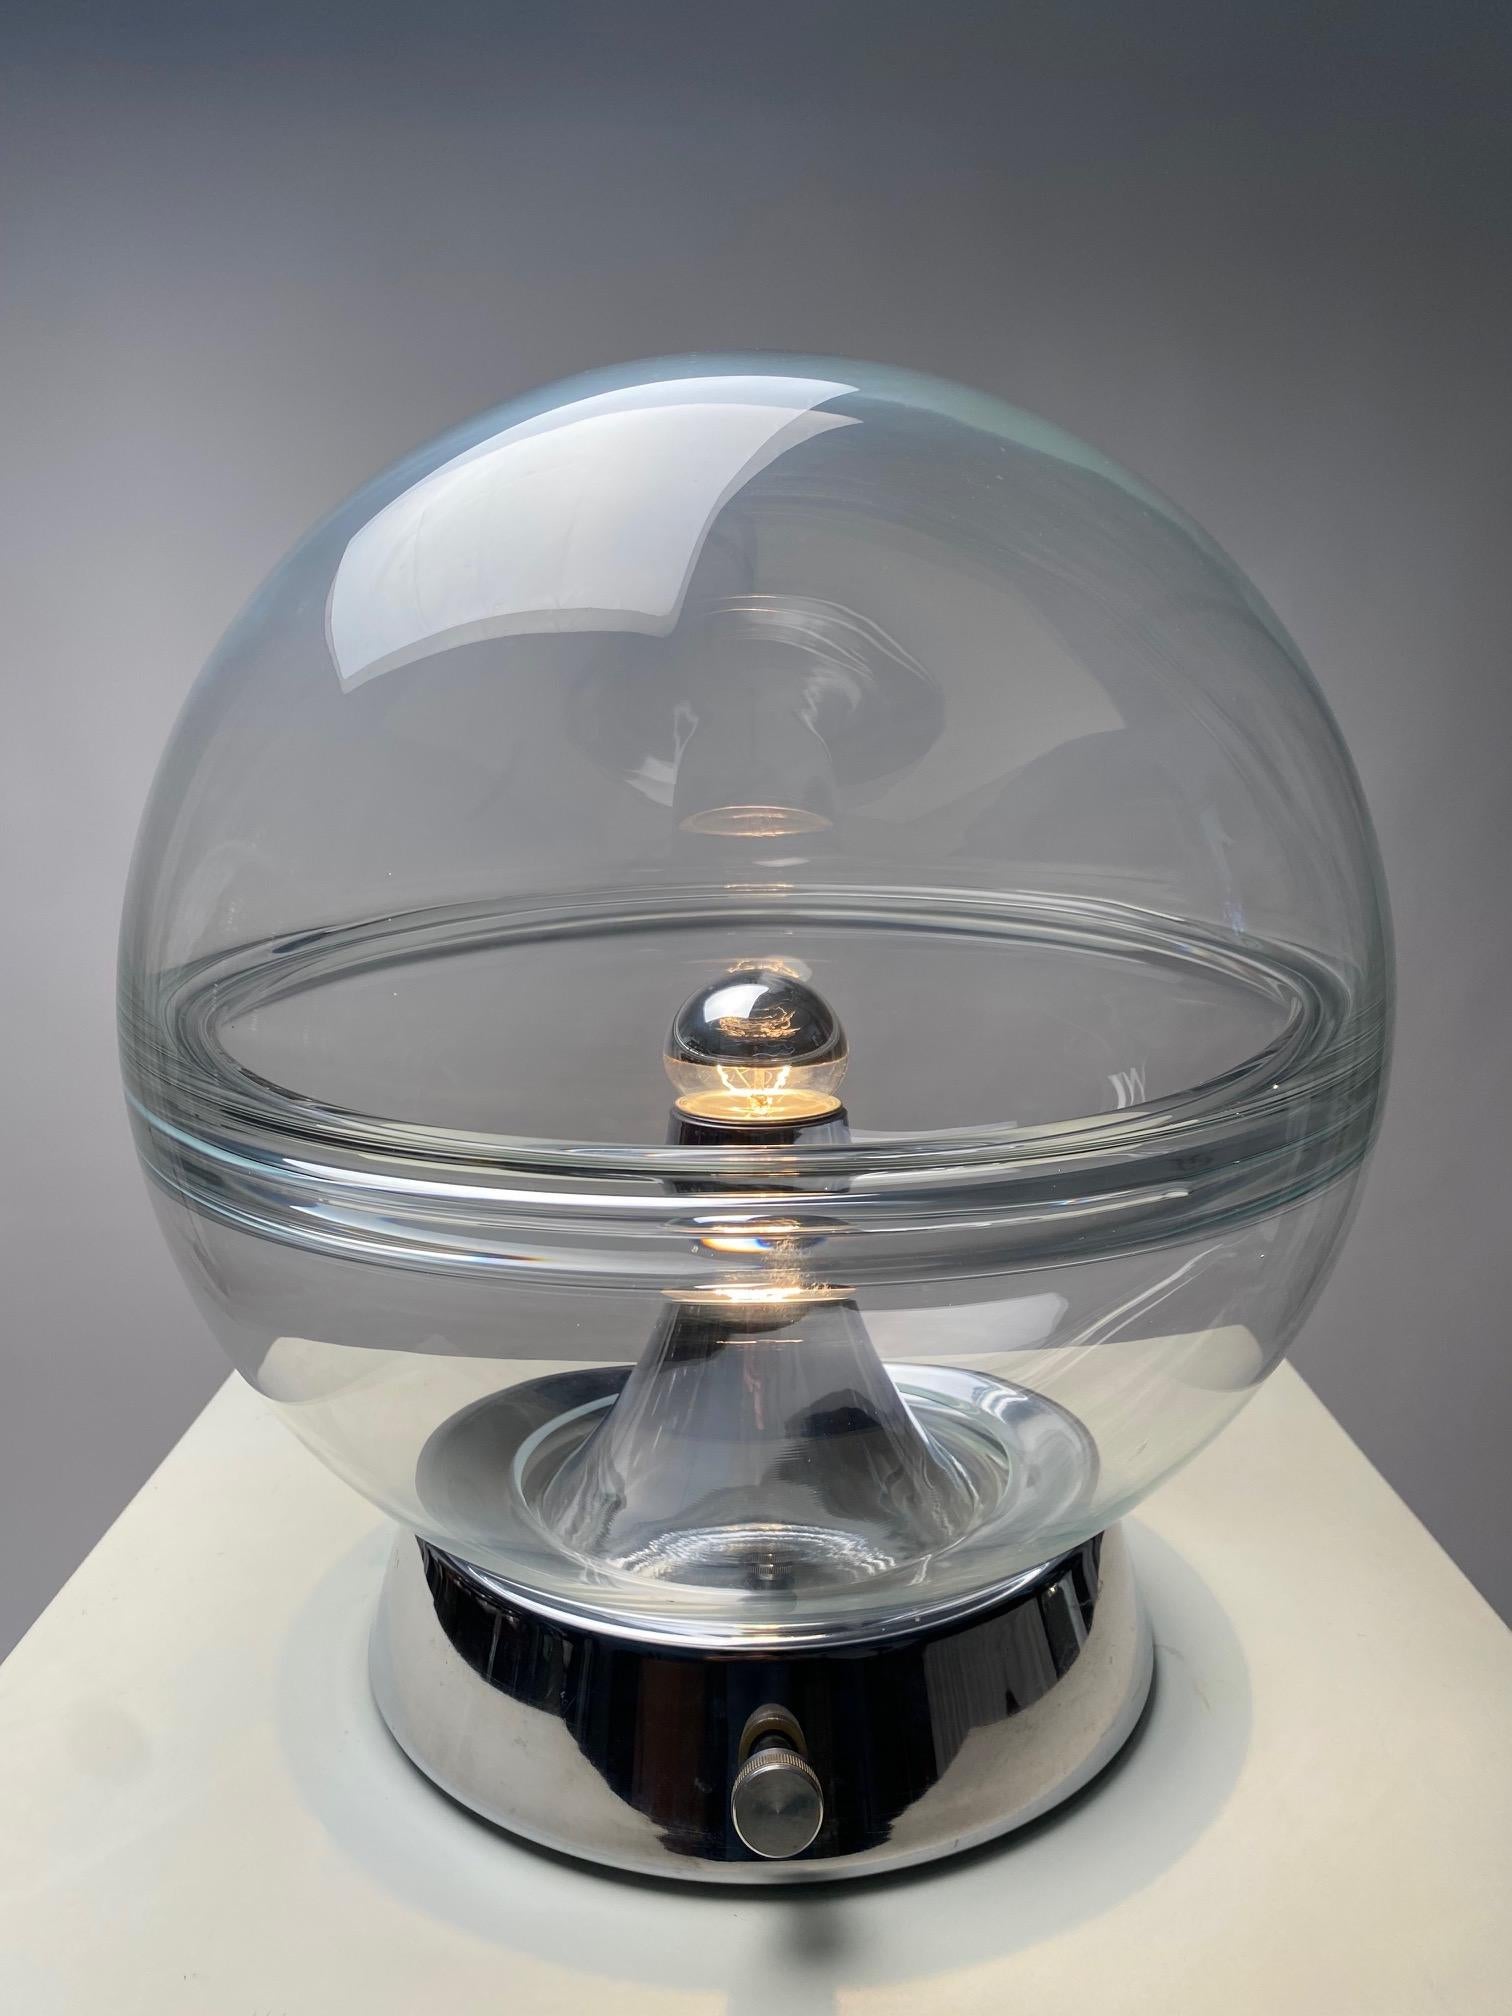 Spherical table lamp with very thick glass, chromed metal base, adjustable light intensity, attributable to Carlo Nason Mazzega, Italy, 1970s